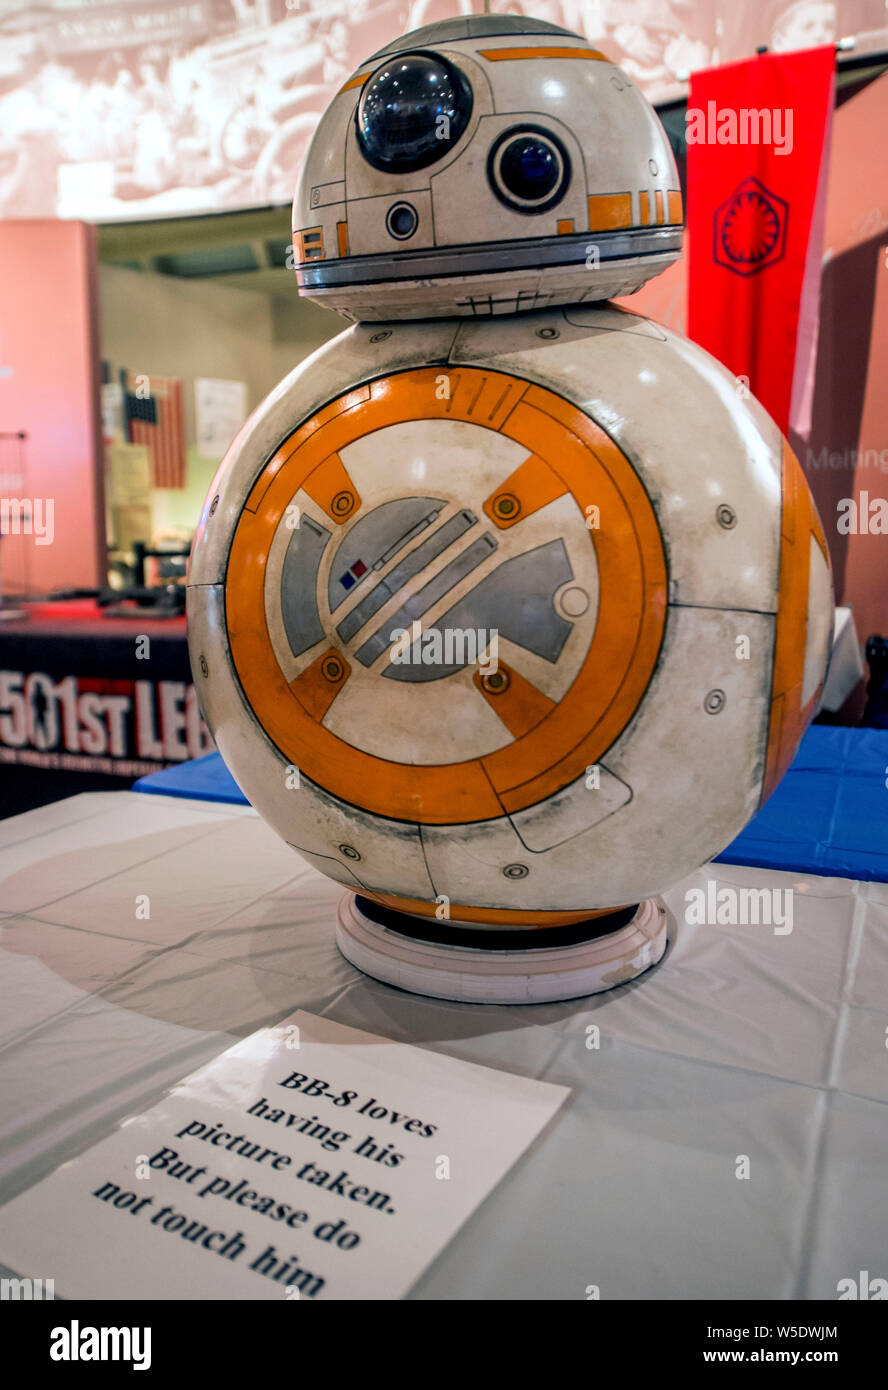 Dearborn, Michigan, USA. 28th July, 2019. Robot BB-8 has his picture taken during the 10th Annual Maker Faire Detroit at the Henry Ford Museum of American Innovation. Maker Faire is a gathering of tech enthusiasts, tinkerers, engineers and science club members who gather to show and share knowledge about what they've made. Credit: Brian Cahn/ZUMA Wire/Alamy Live News Stock Photo